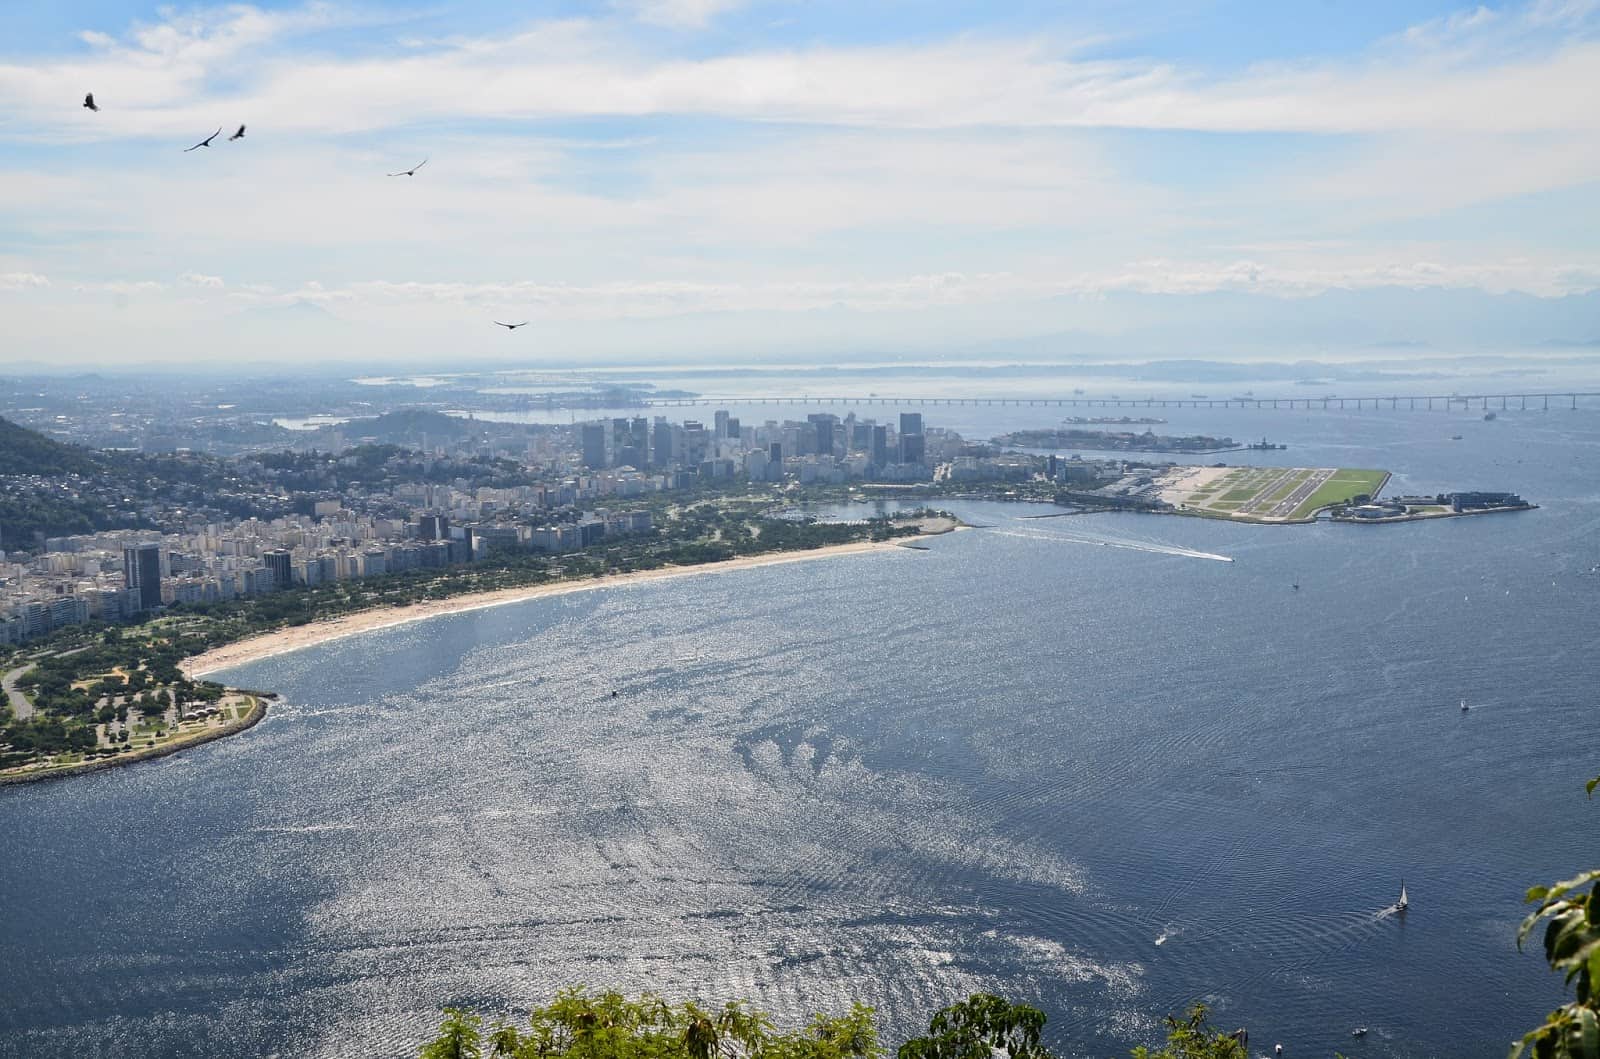 View of Flamengo and the city center from Sugarloaf Mountain in Rio de Janeiro, Brazil